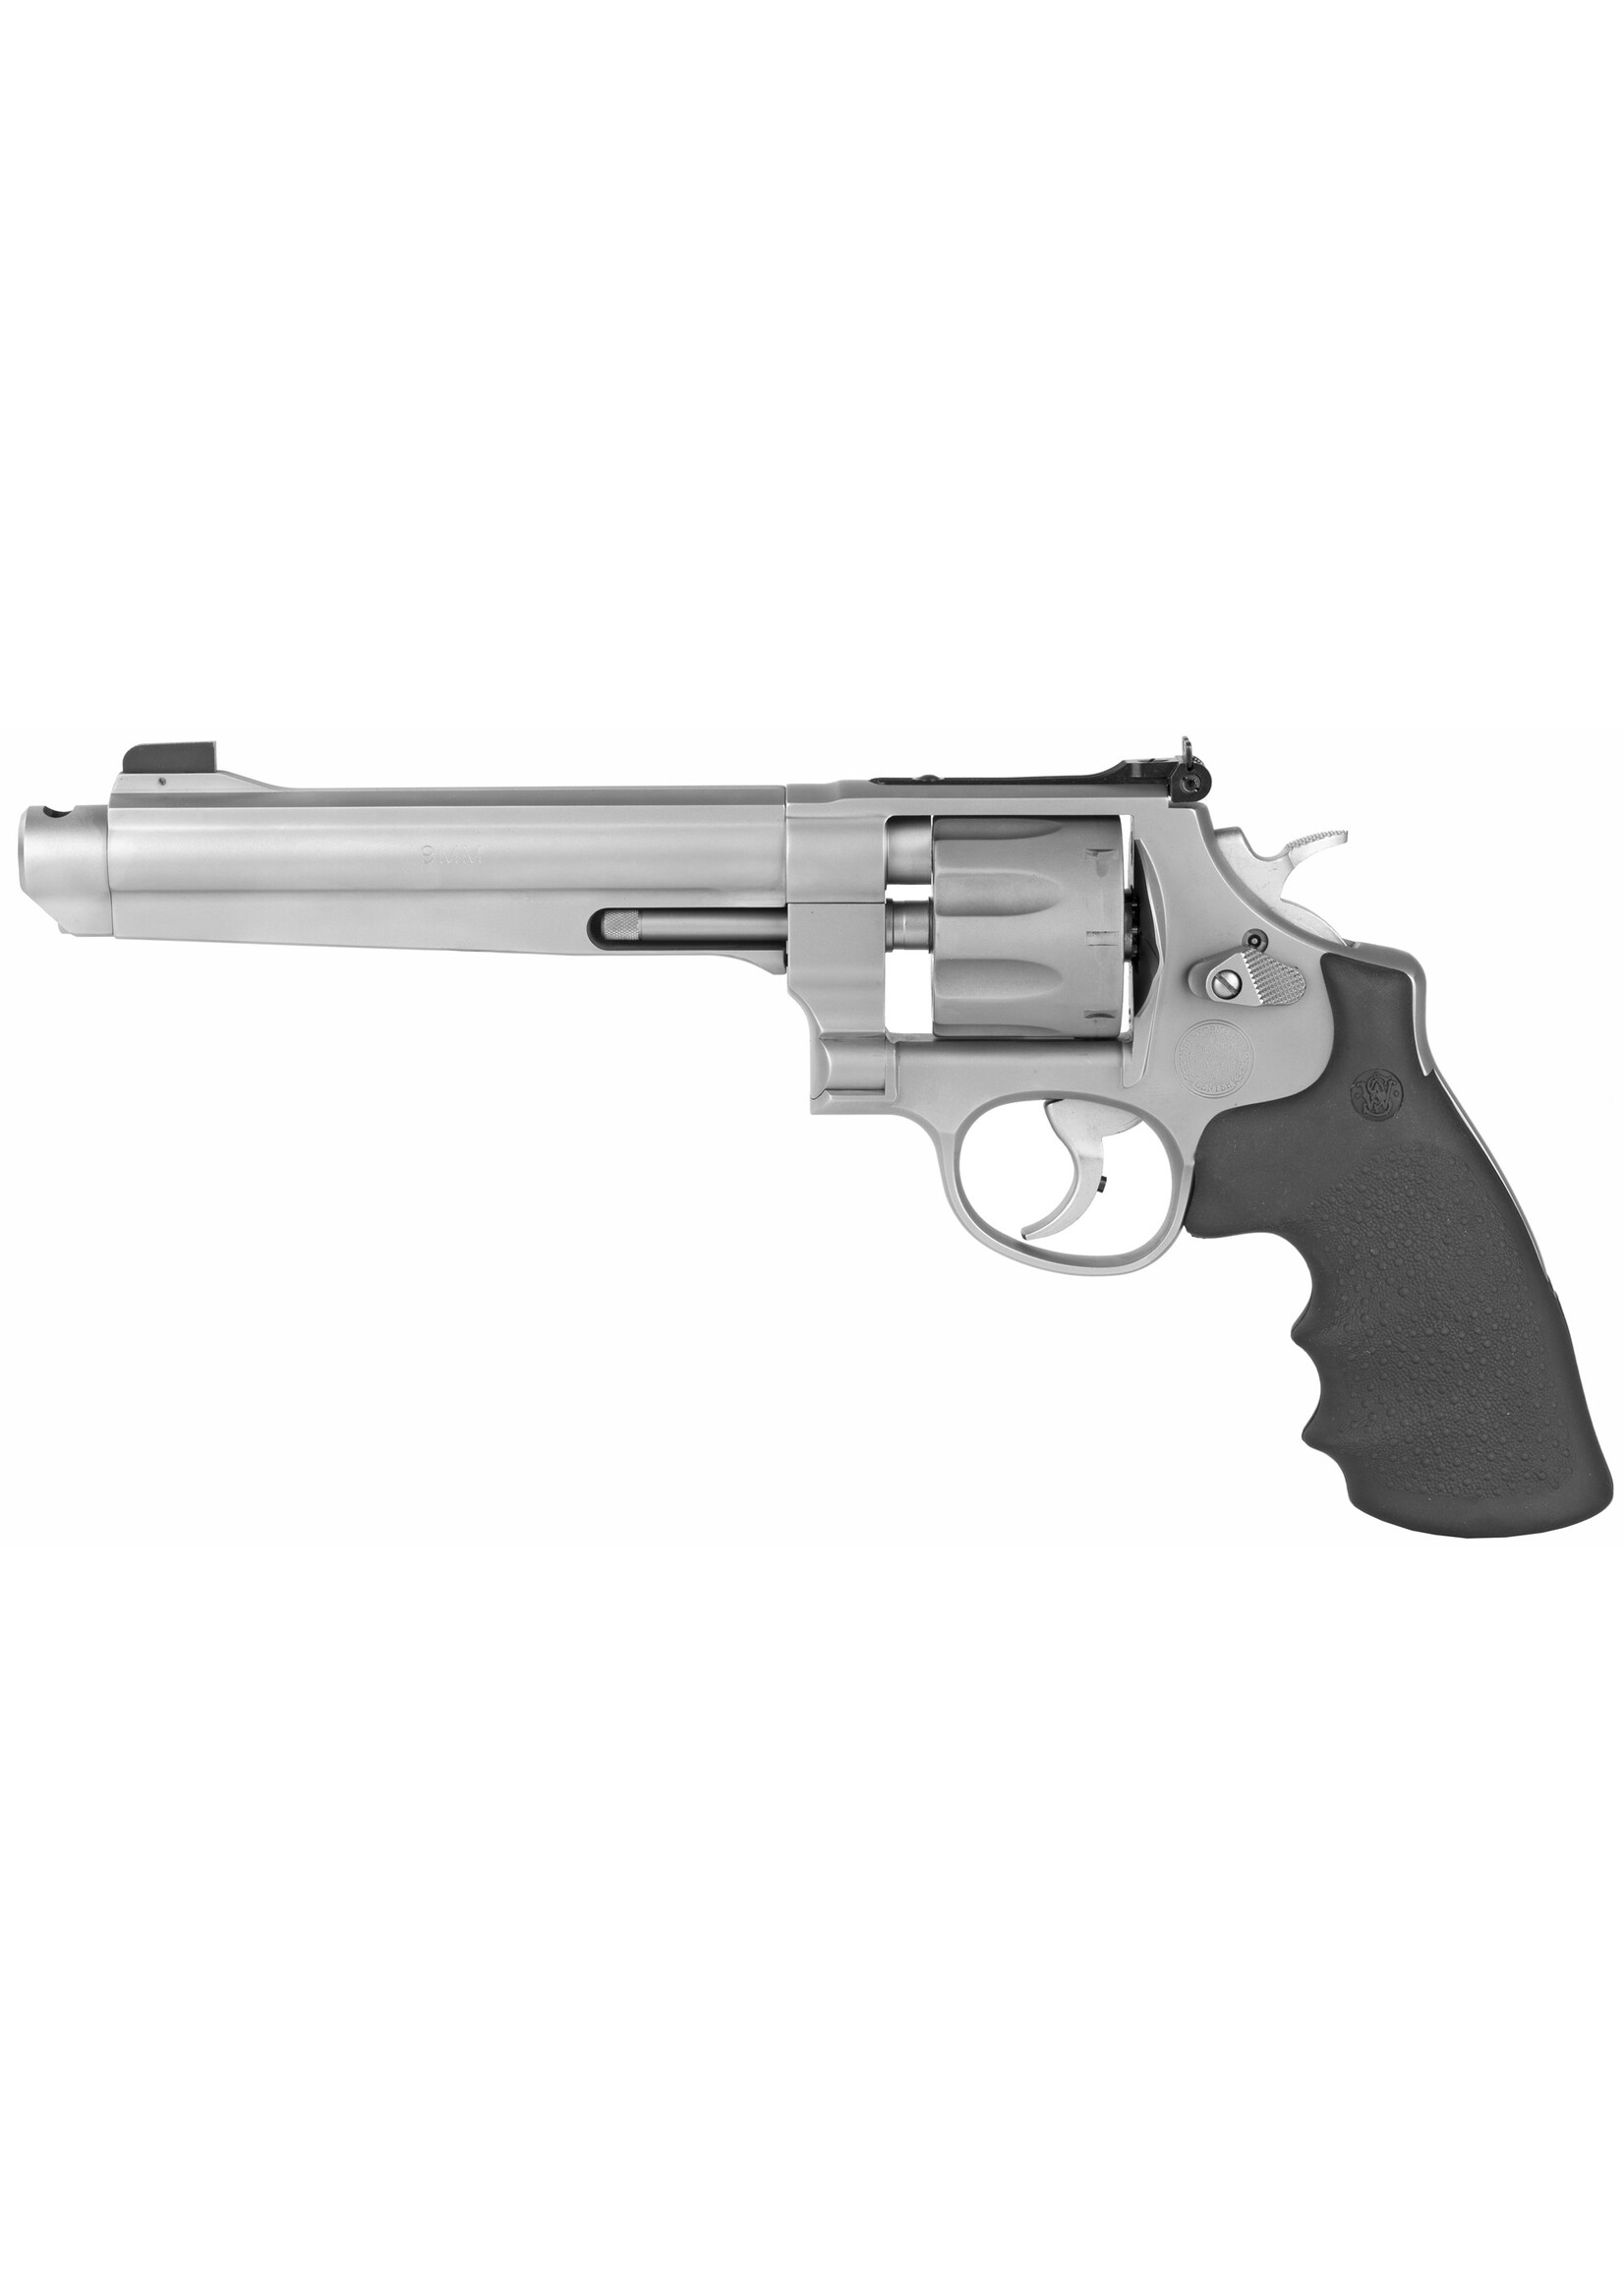 SMITH & WESSON MODEL 929 PC 9MM 8RD 6.5"